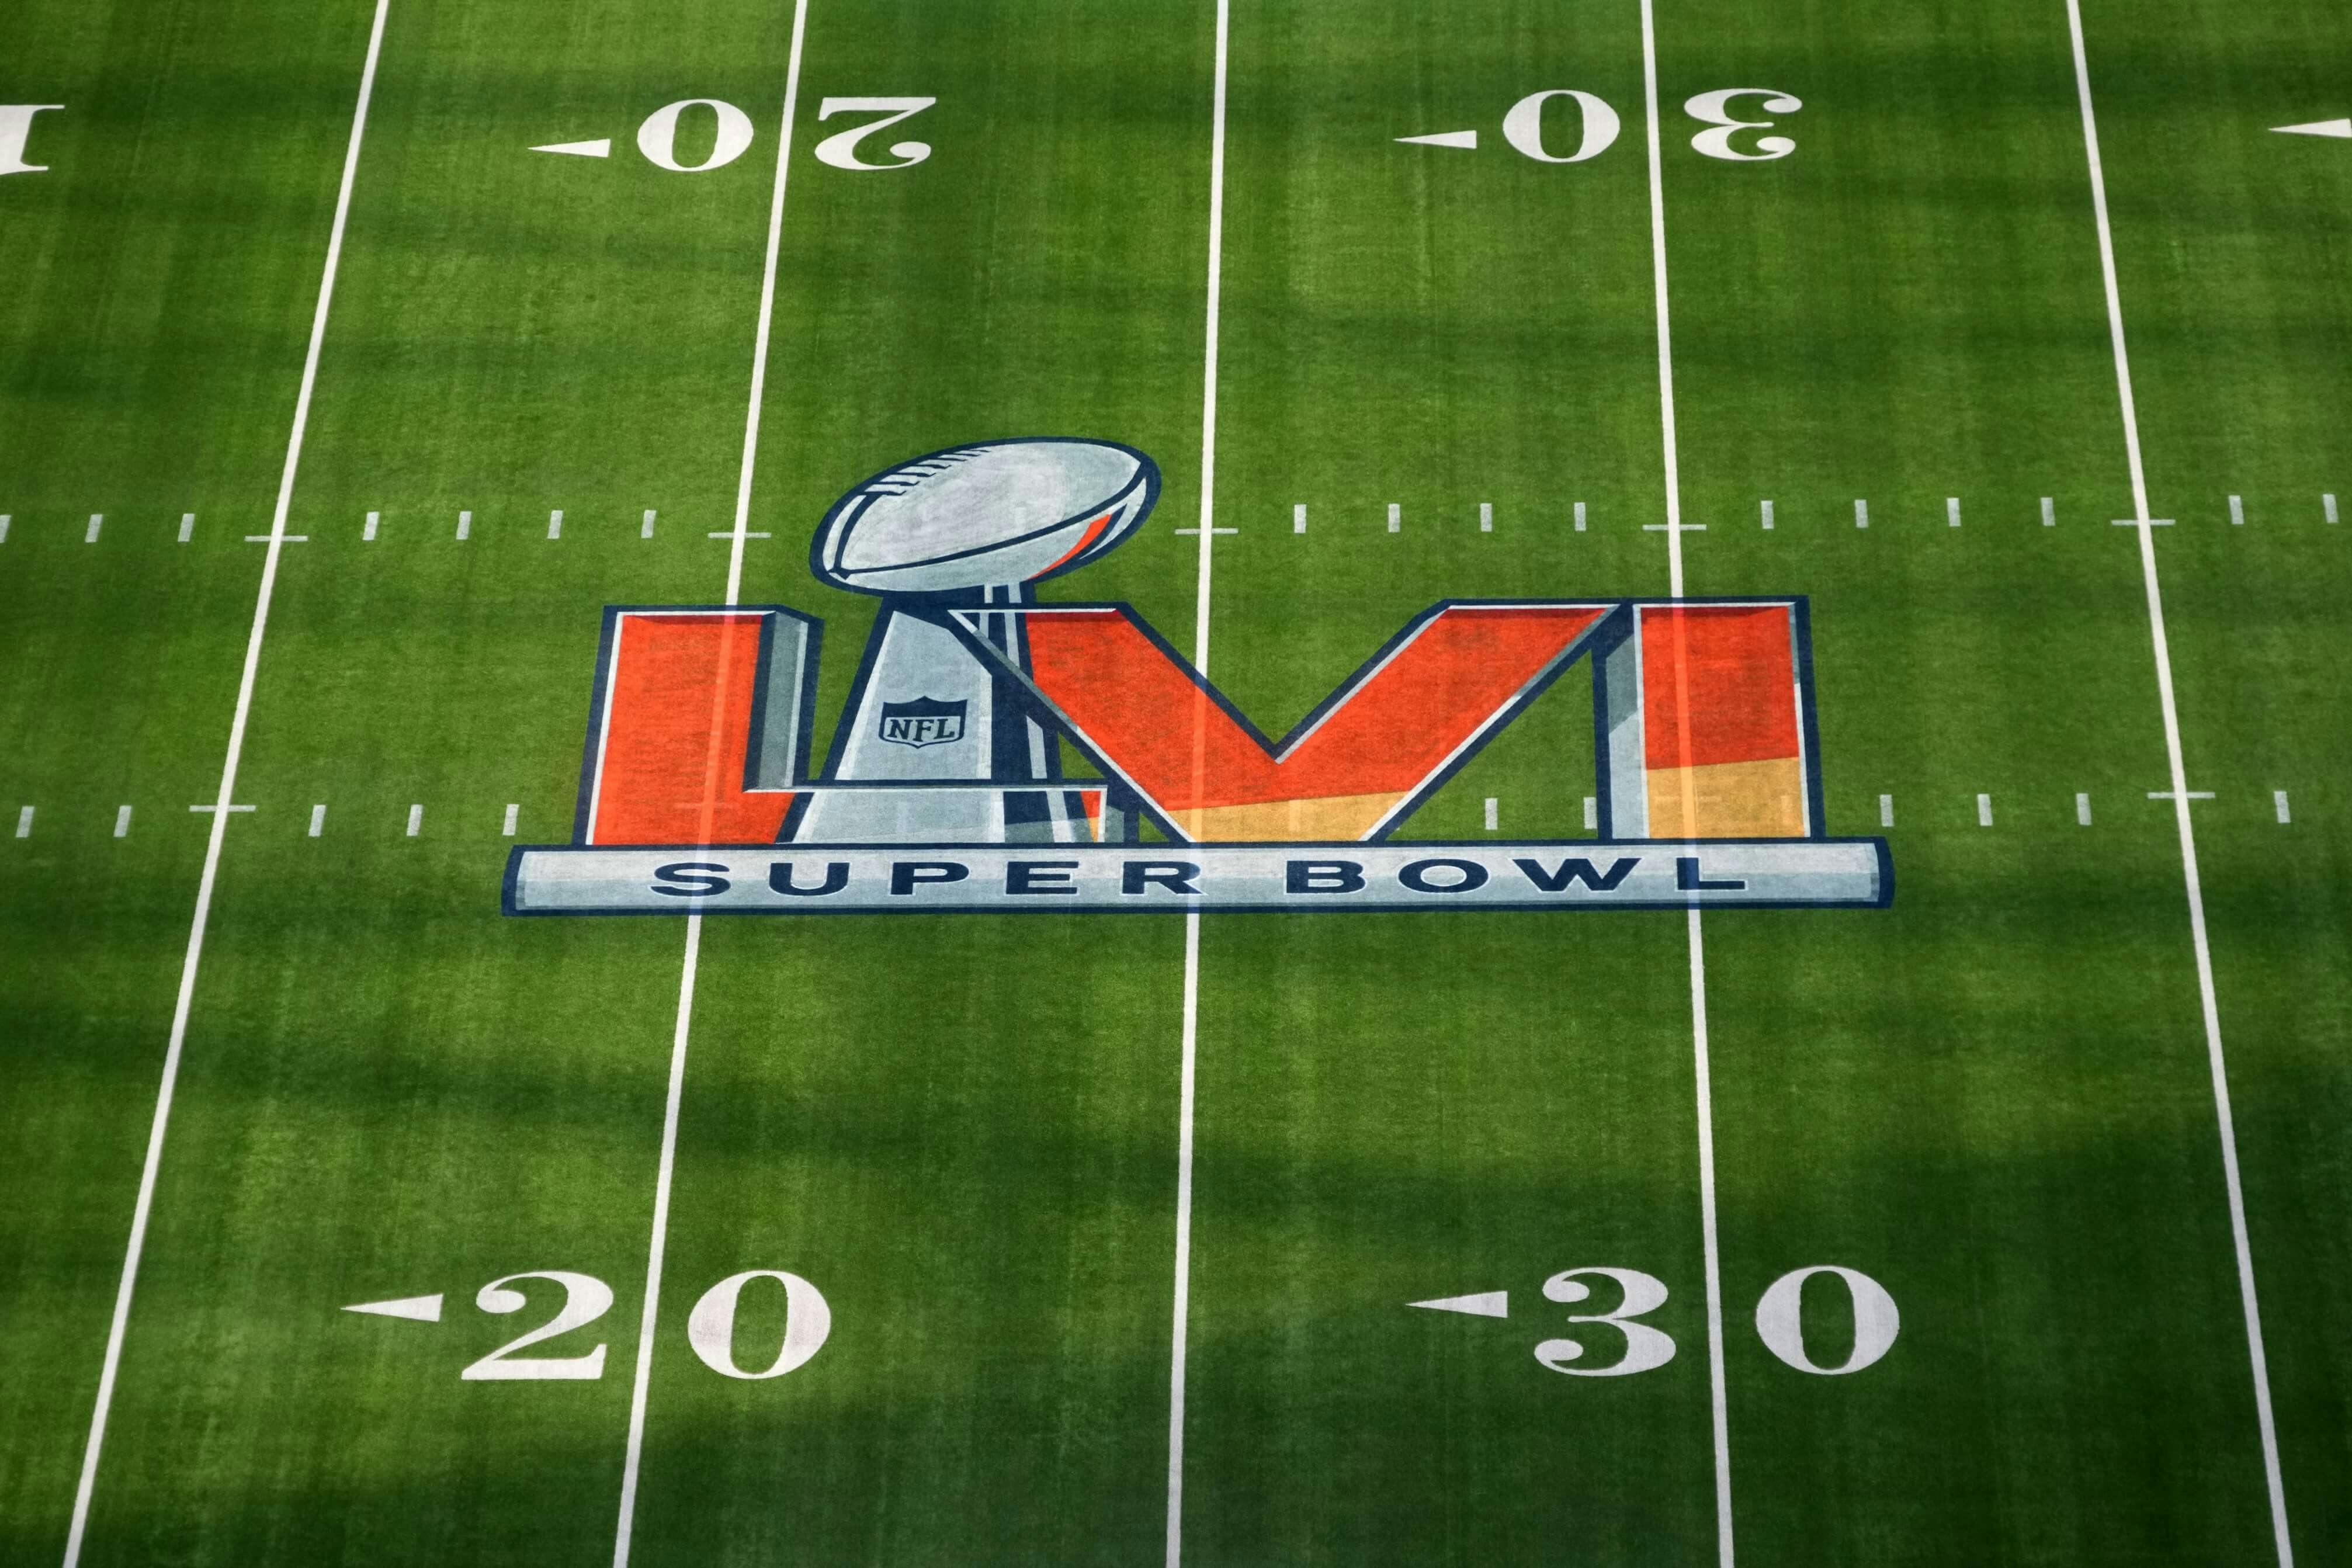 Feb 1, 2022; Inglewood, CA, USA; A detailed view of the Super Bowl LVI logo on the field at SoFi Stadium. Super Bowl 56 between the Los Angeles Rams and the Cincinnati Bengals will be played on Feb. 13, 2022.